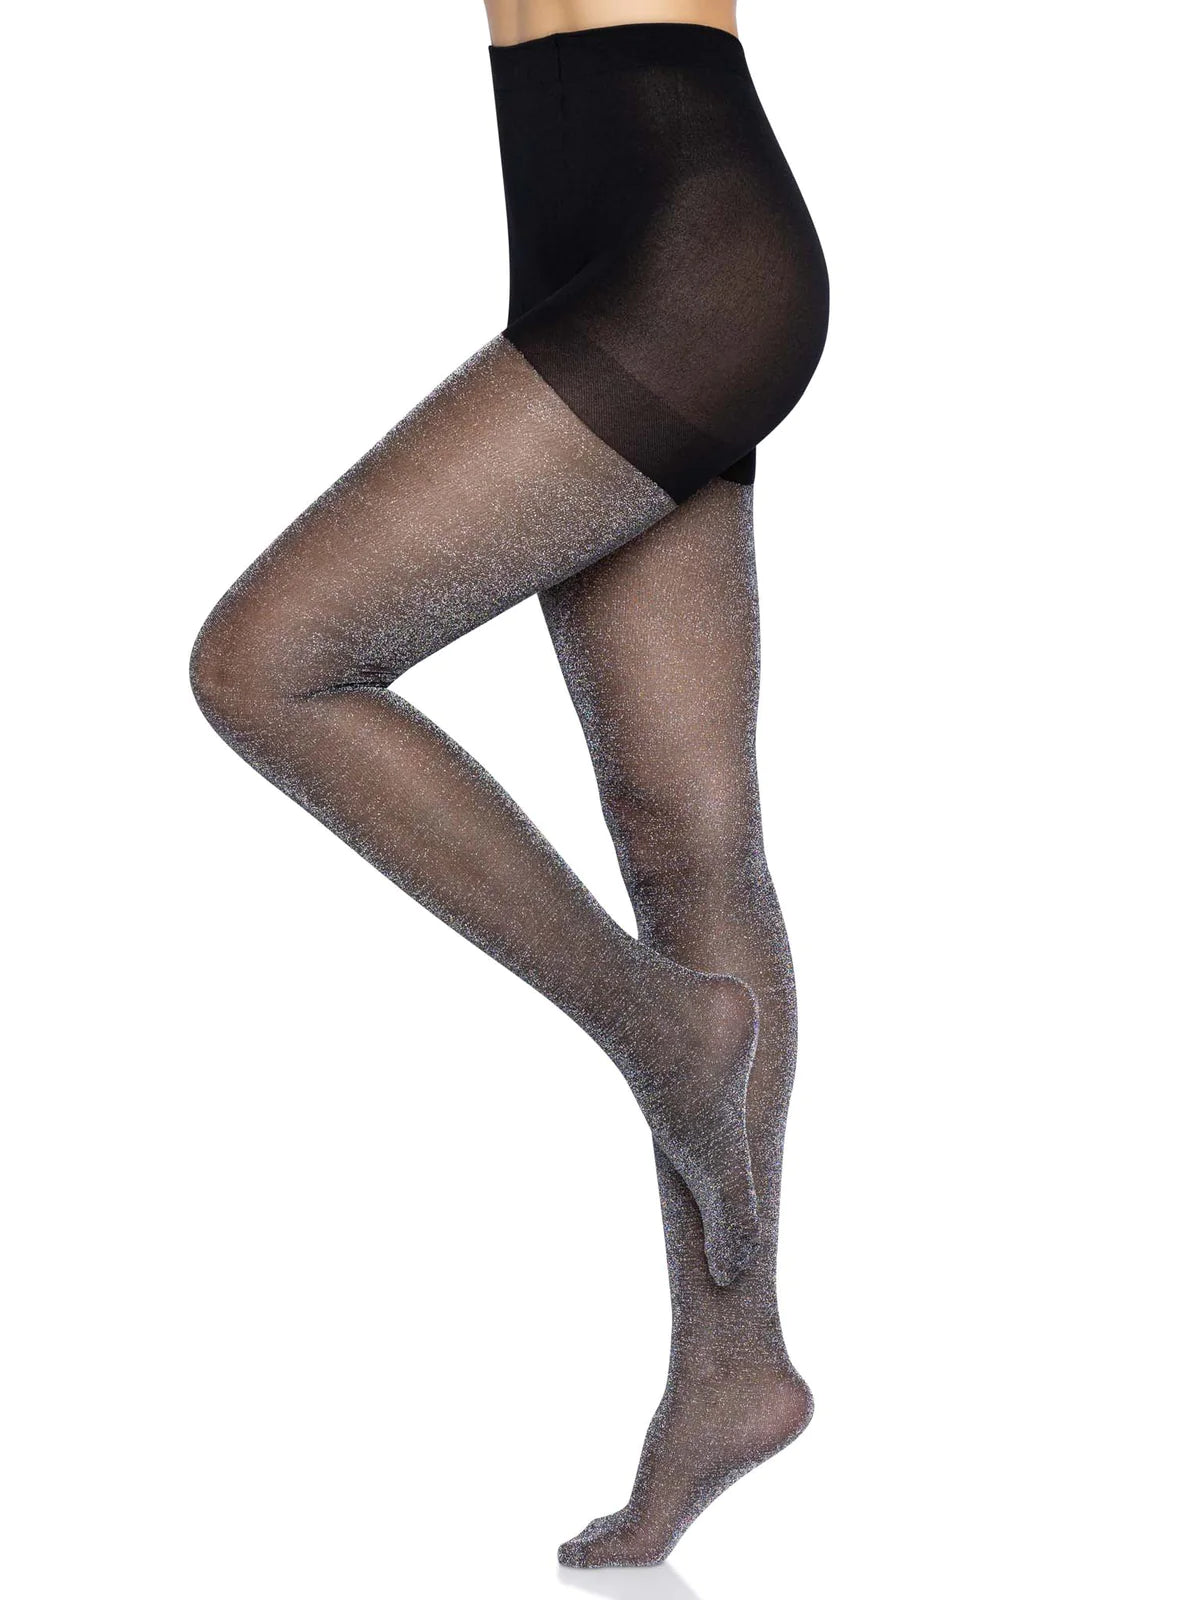 Adult Womens Sheer Nude Shimmer Tights Pantyhose Stockings